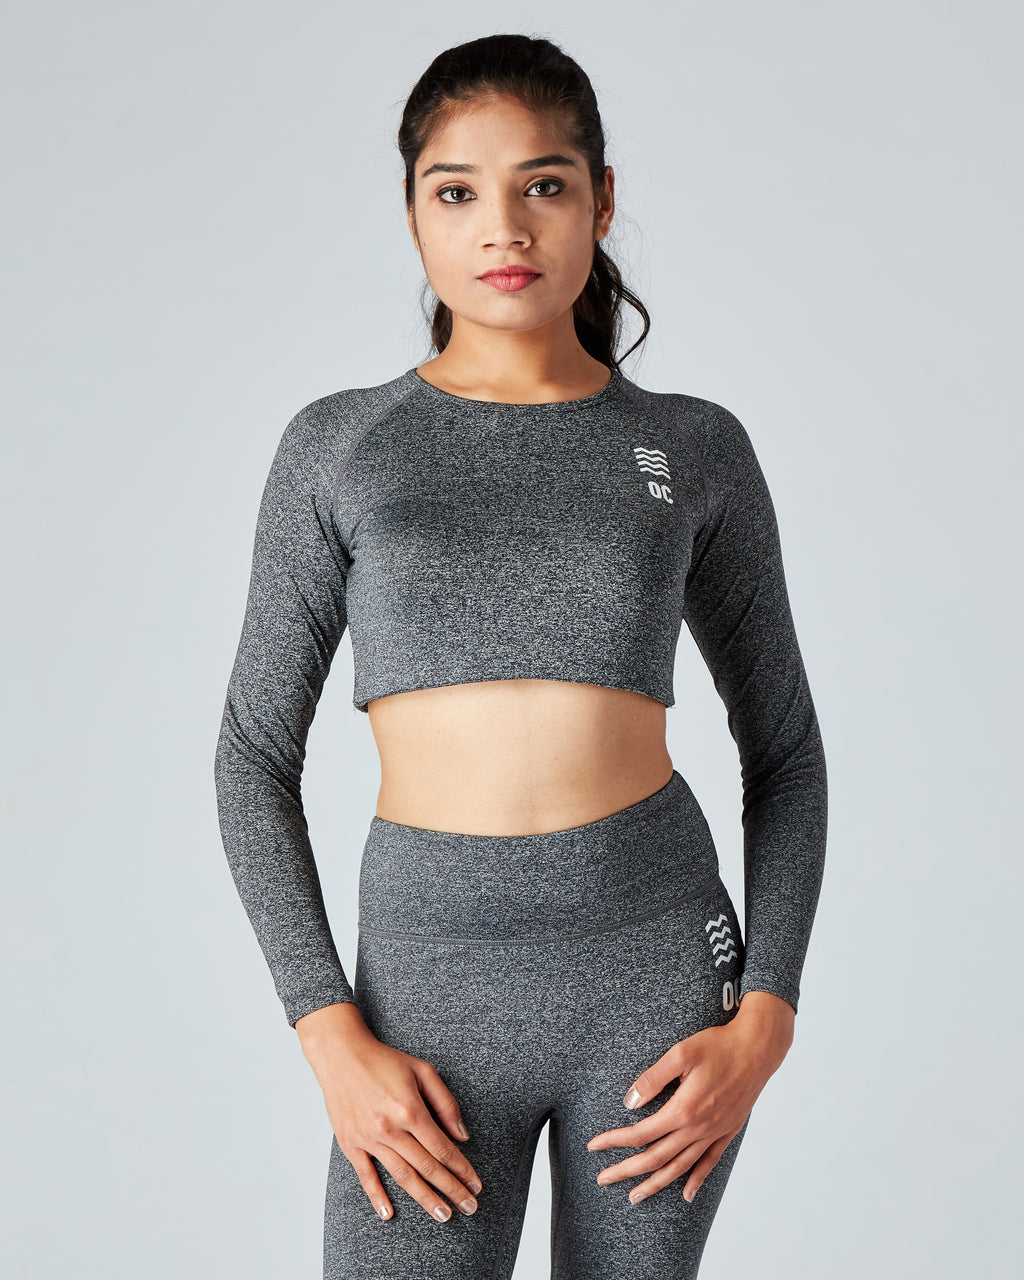 OC Eco Long Sleeve Grey Cropped Top